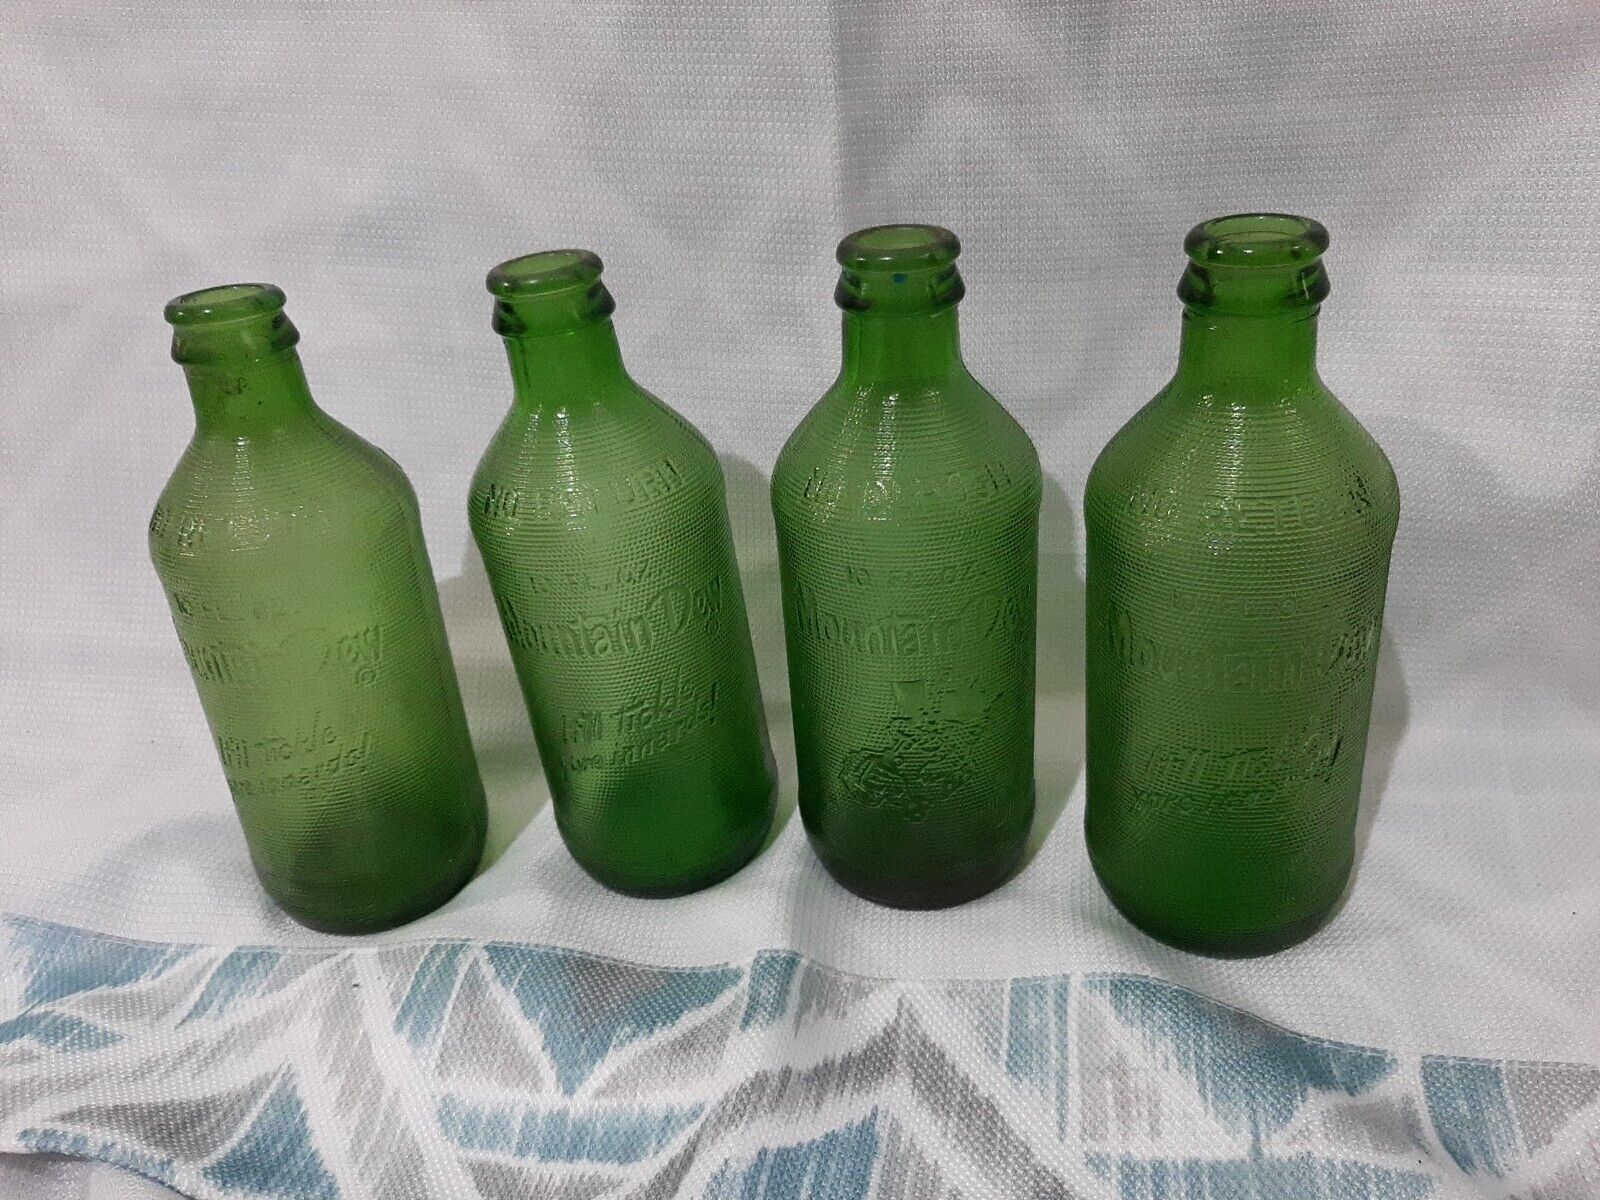 Extremely Rare 1960s Mountain Dew Bottles